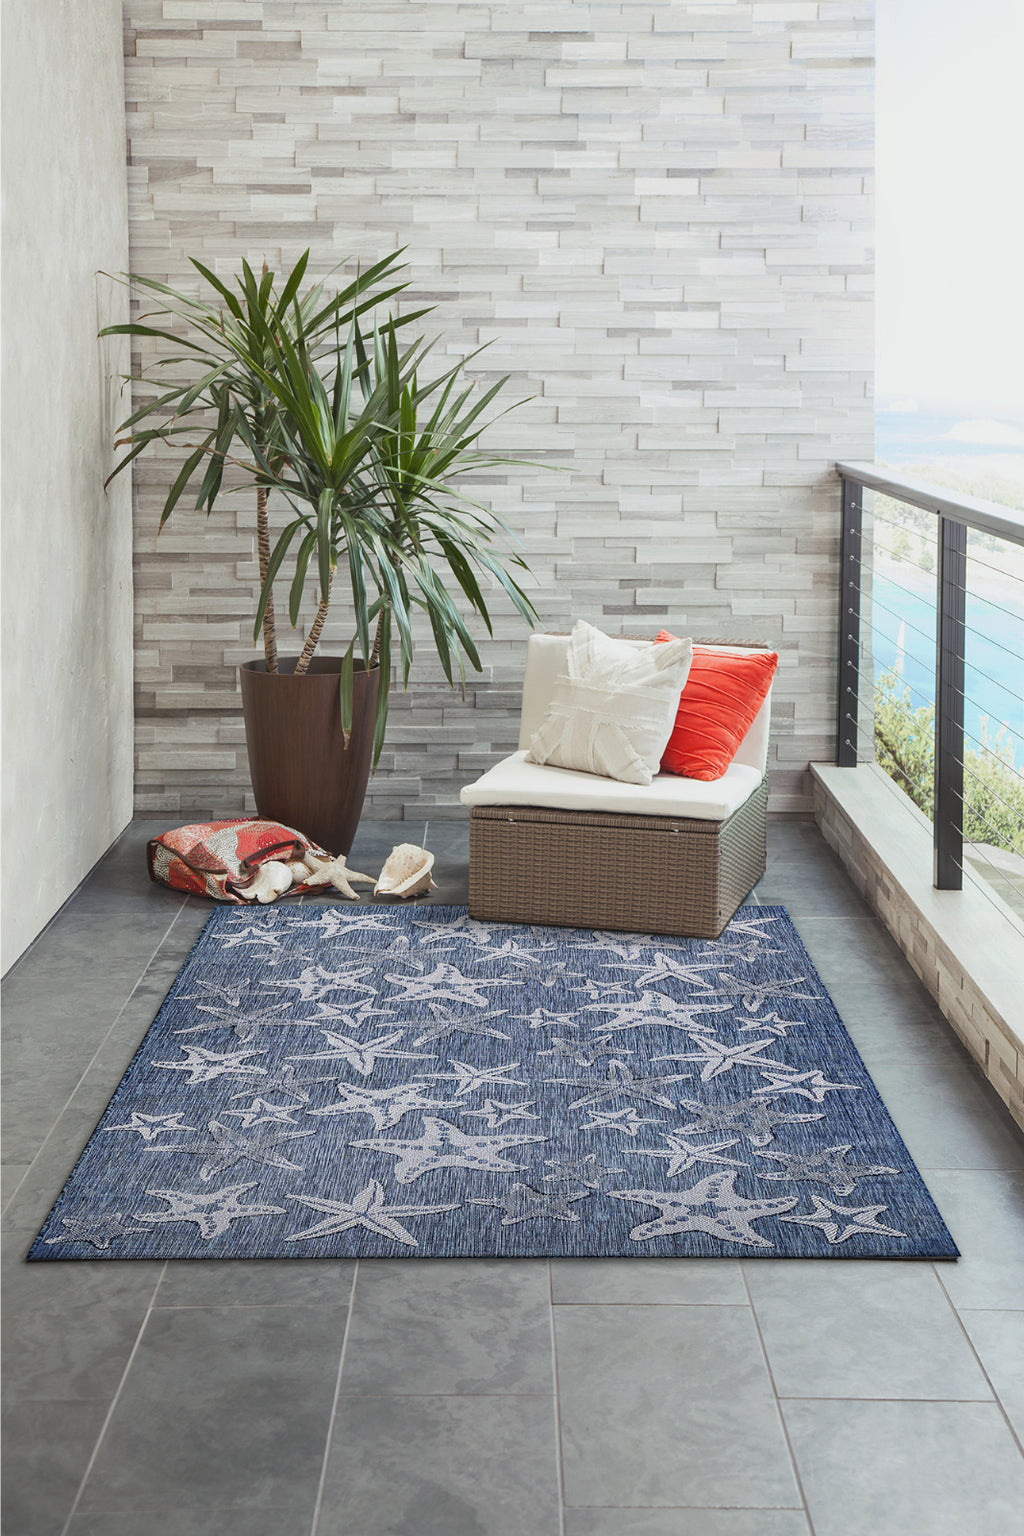 Trans Ocean Carmel 8415/33 Starfish Navy Area Rug by Liora Manne Room Scene Image Feature